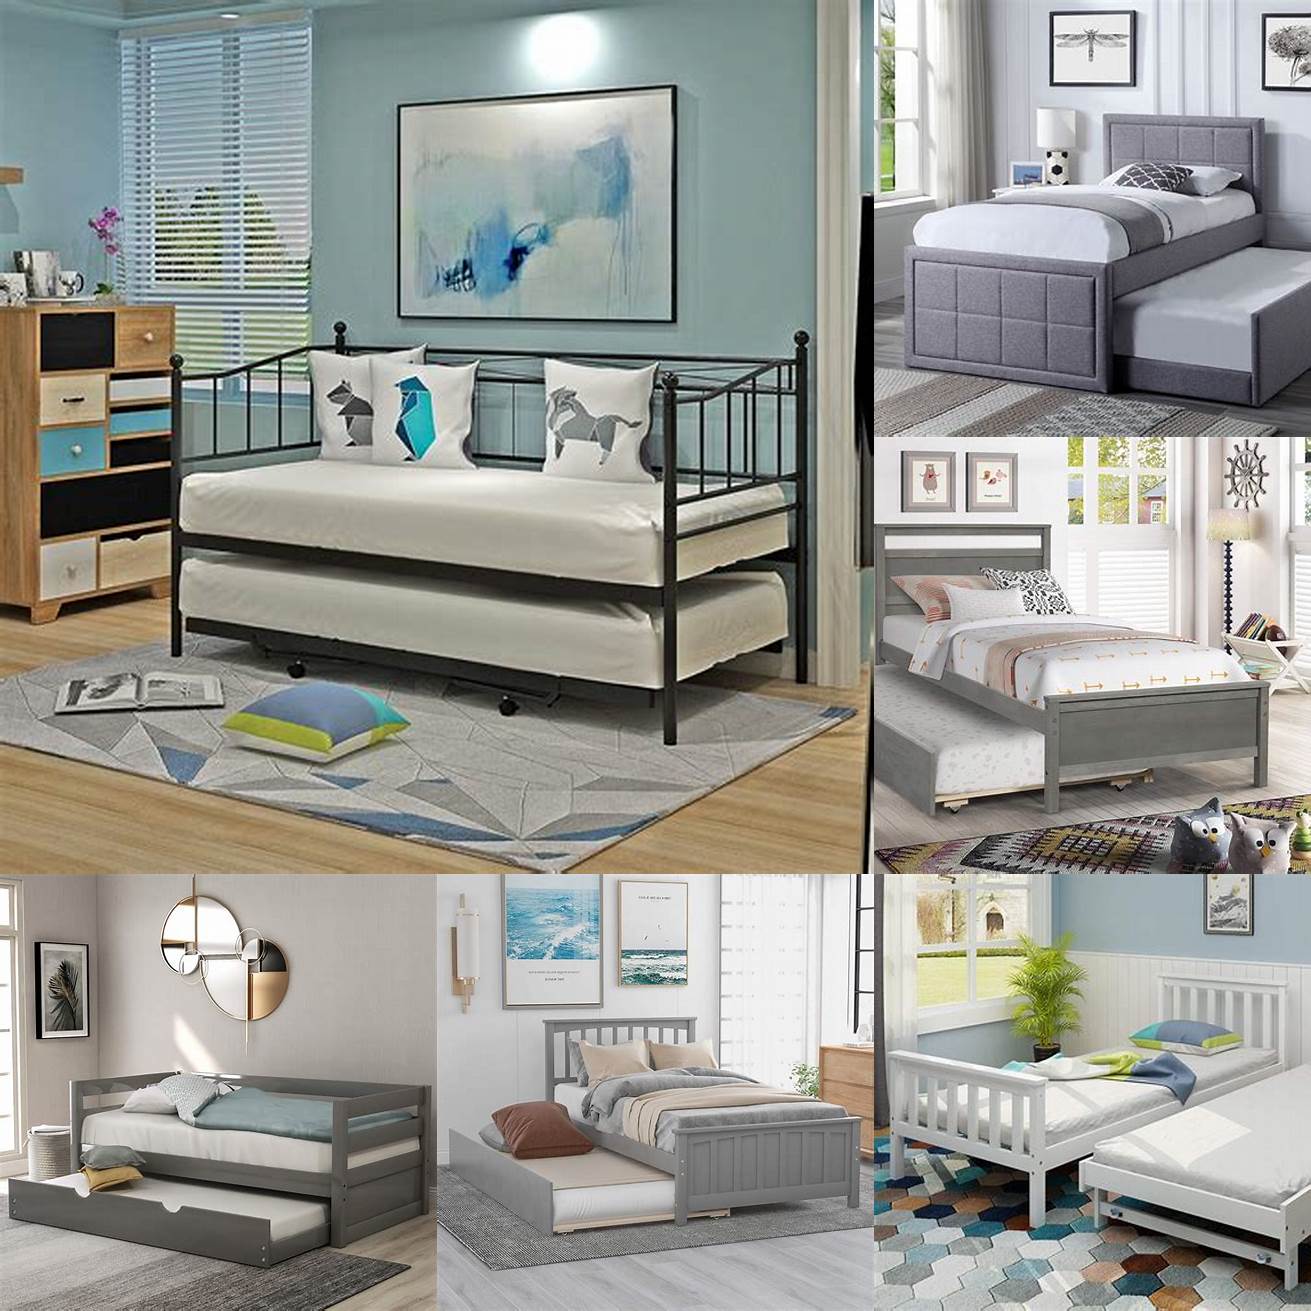 A trundle bed frame has a pull-out bed underneath perfect for sleepovers or for accommodating guests